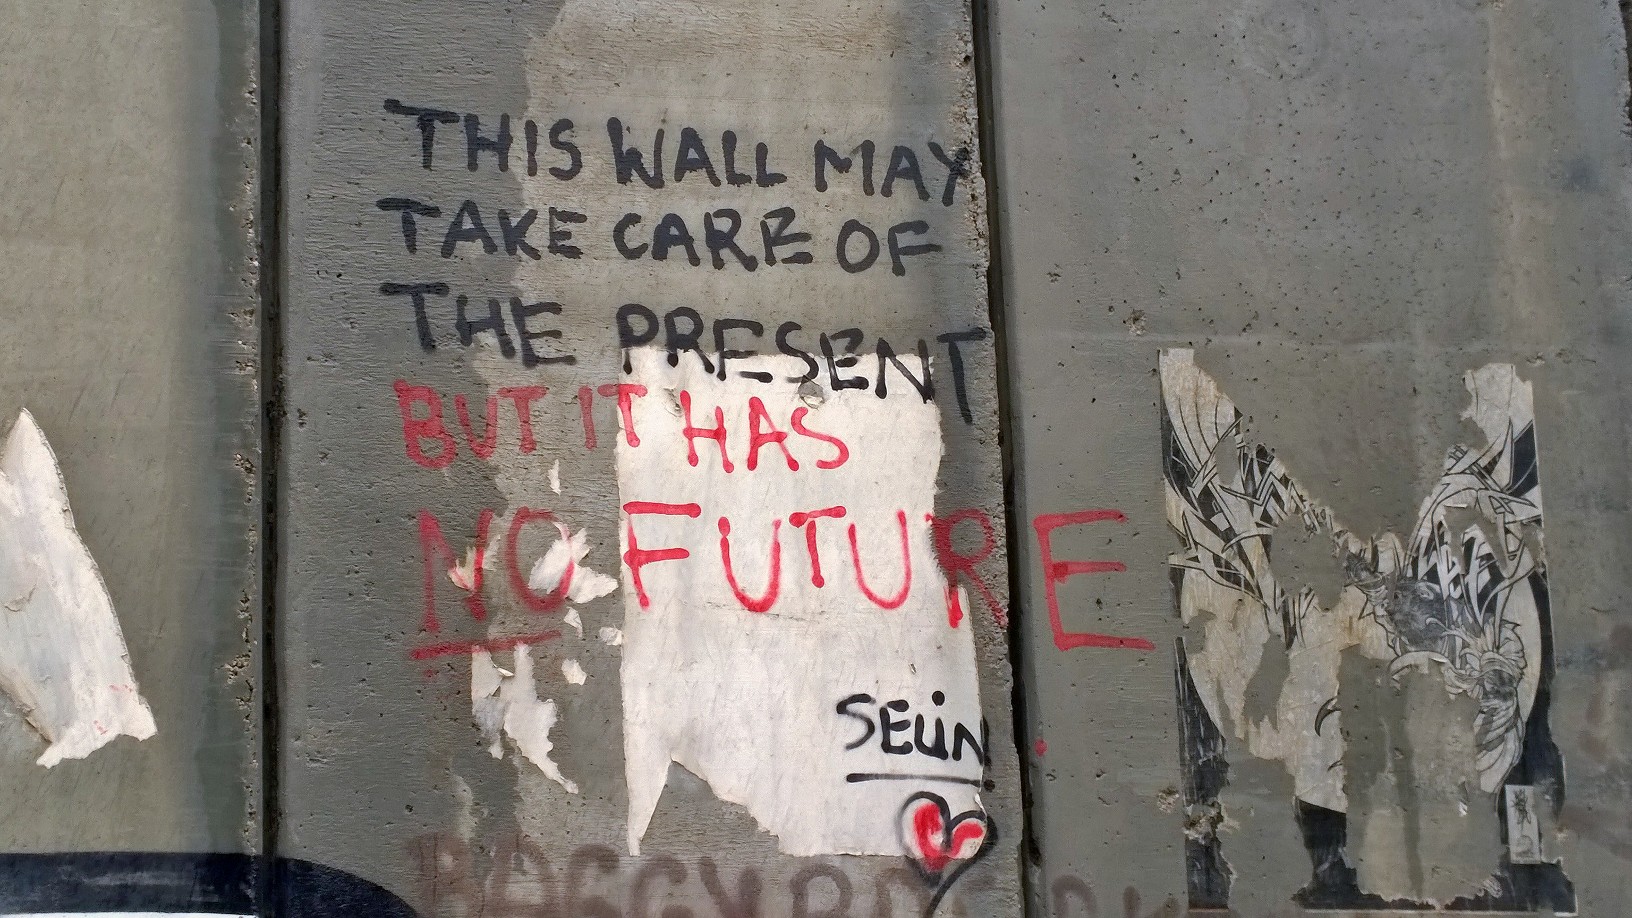 "This wall may take care of the present but this has no future"